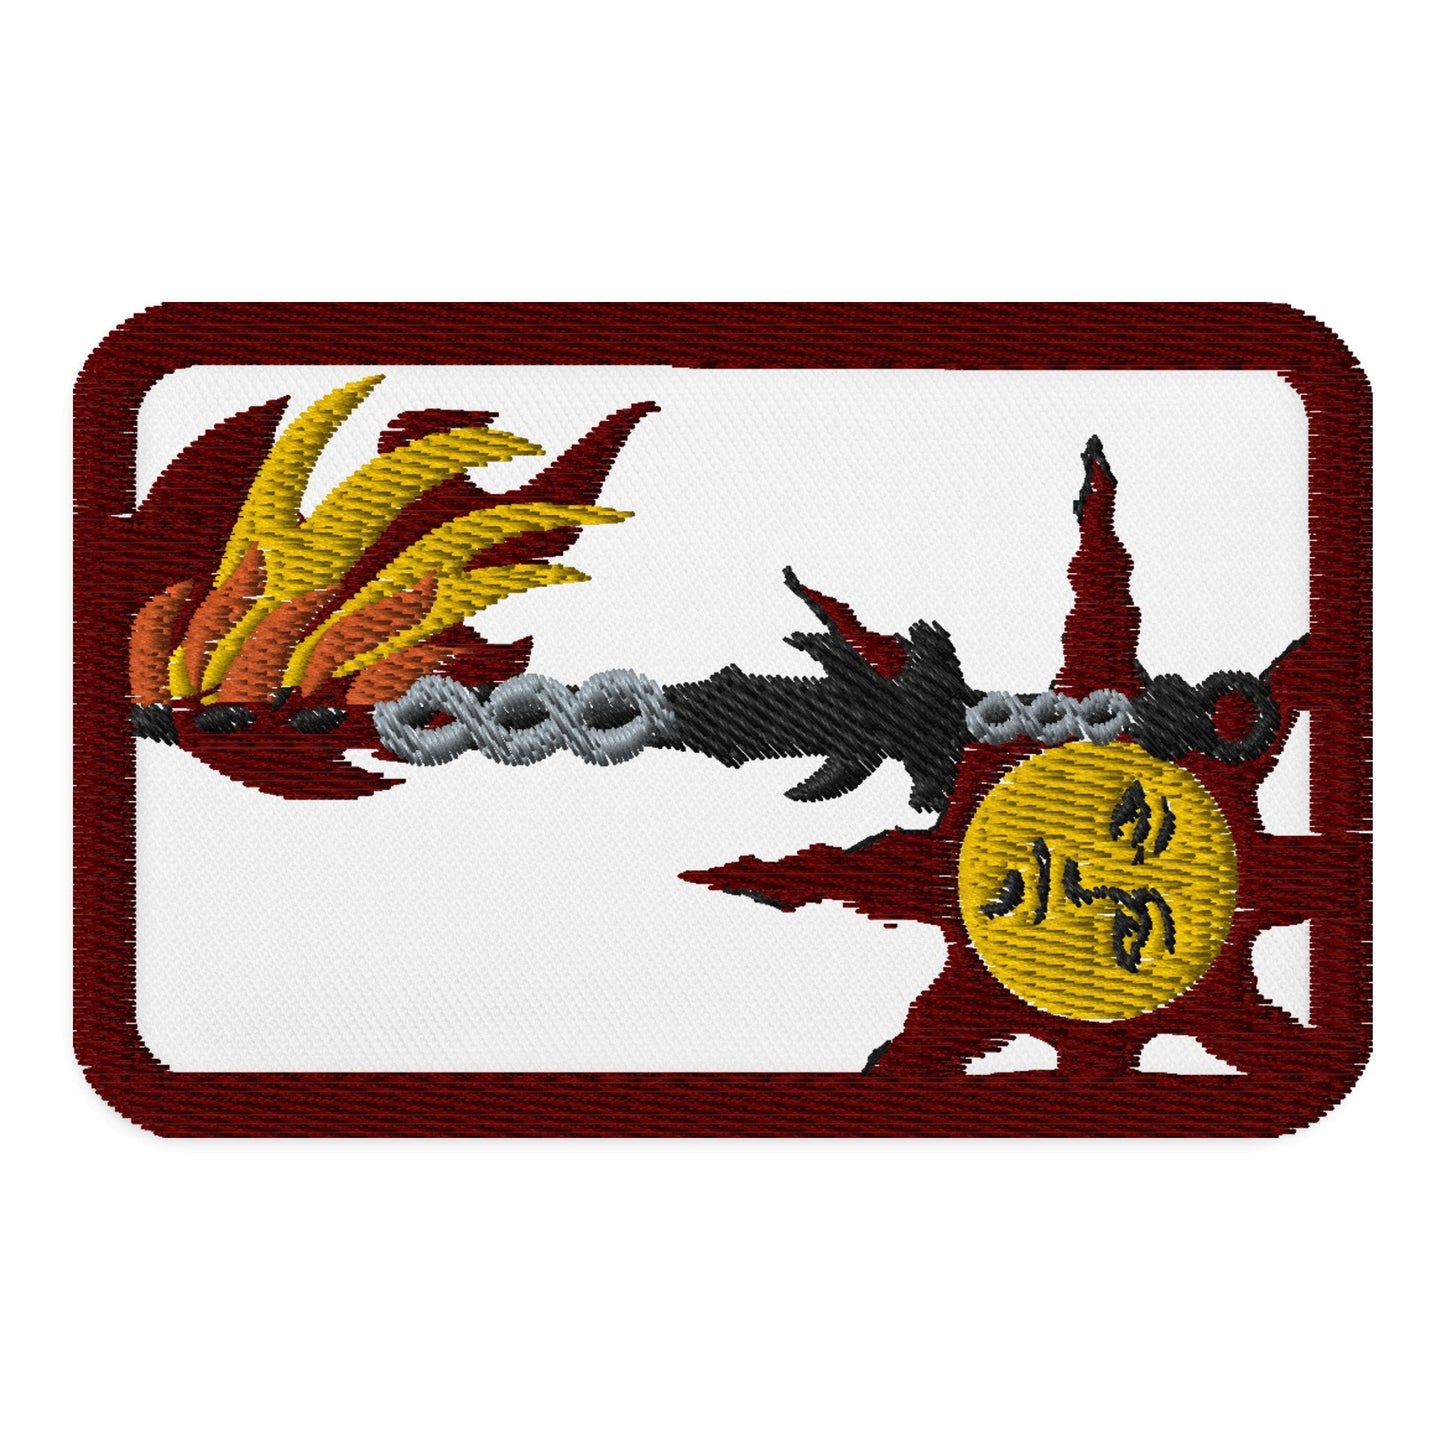 Artsy Patches: Coiled Sword - Red Pawn Shop